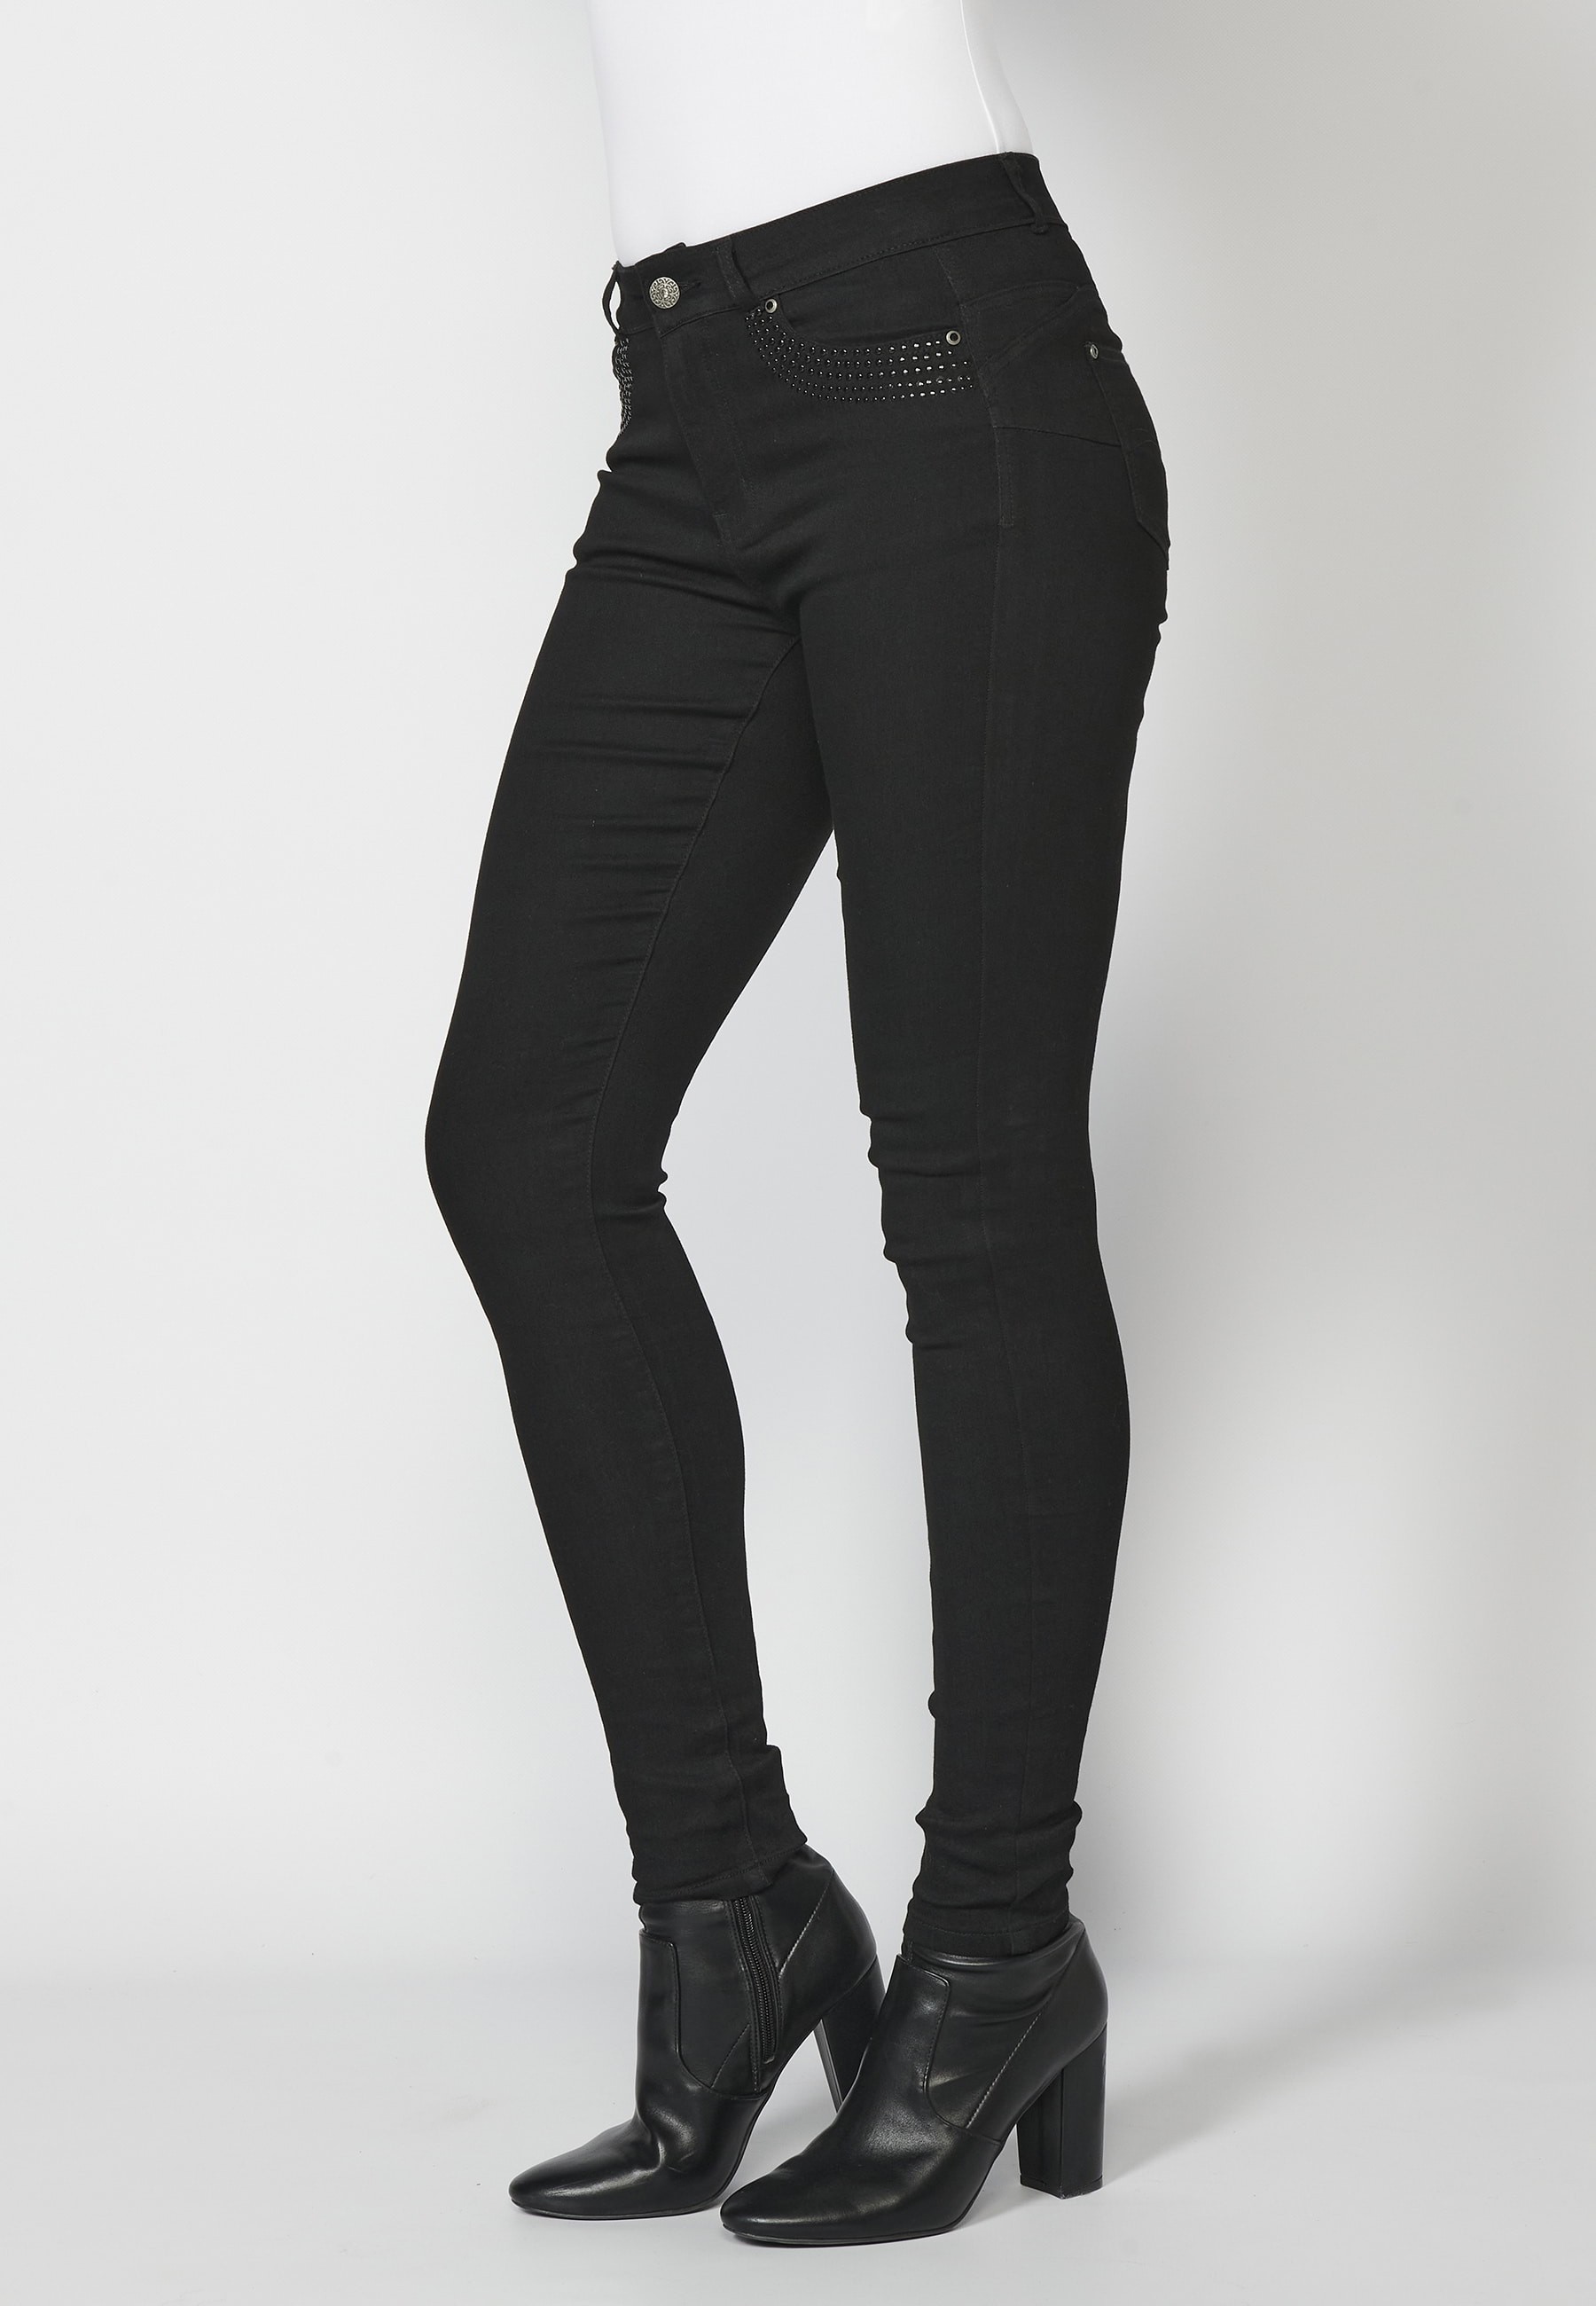 Long slim-fit jean pants with stud details on pockets in Black color for Woman